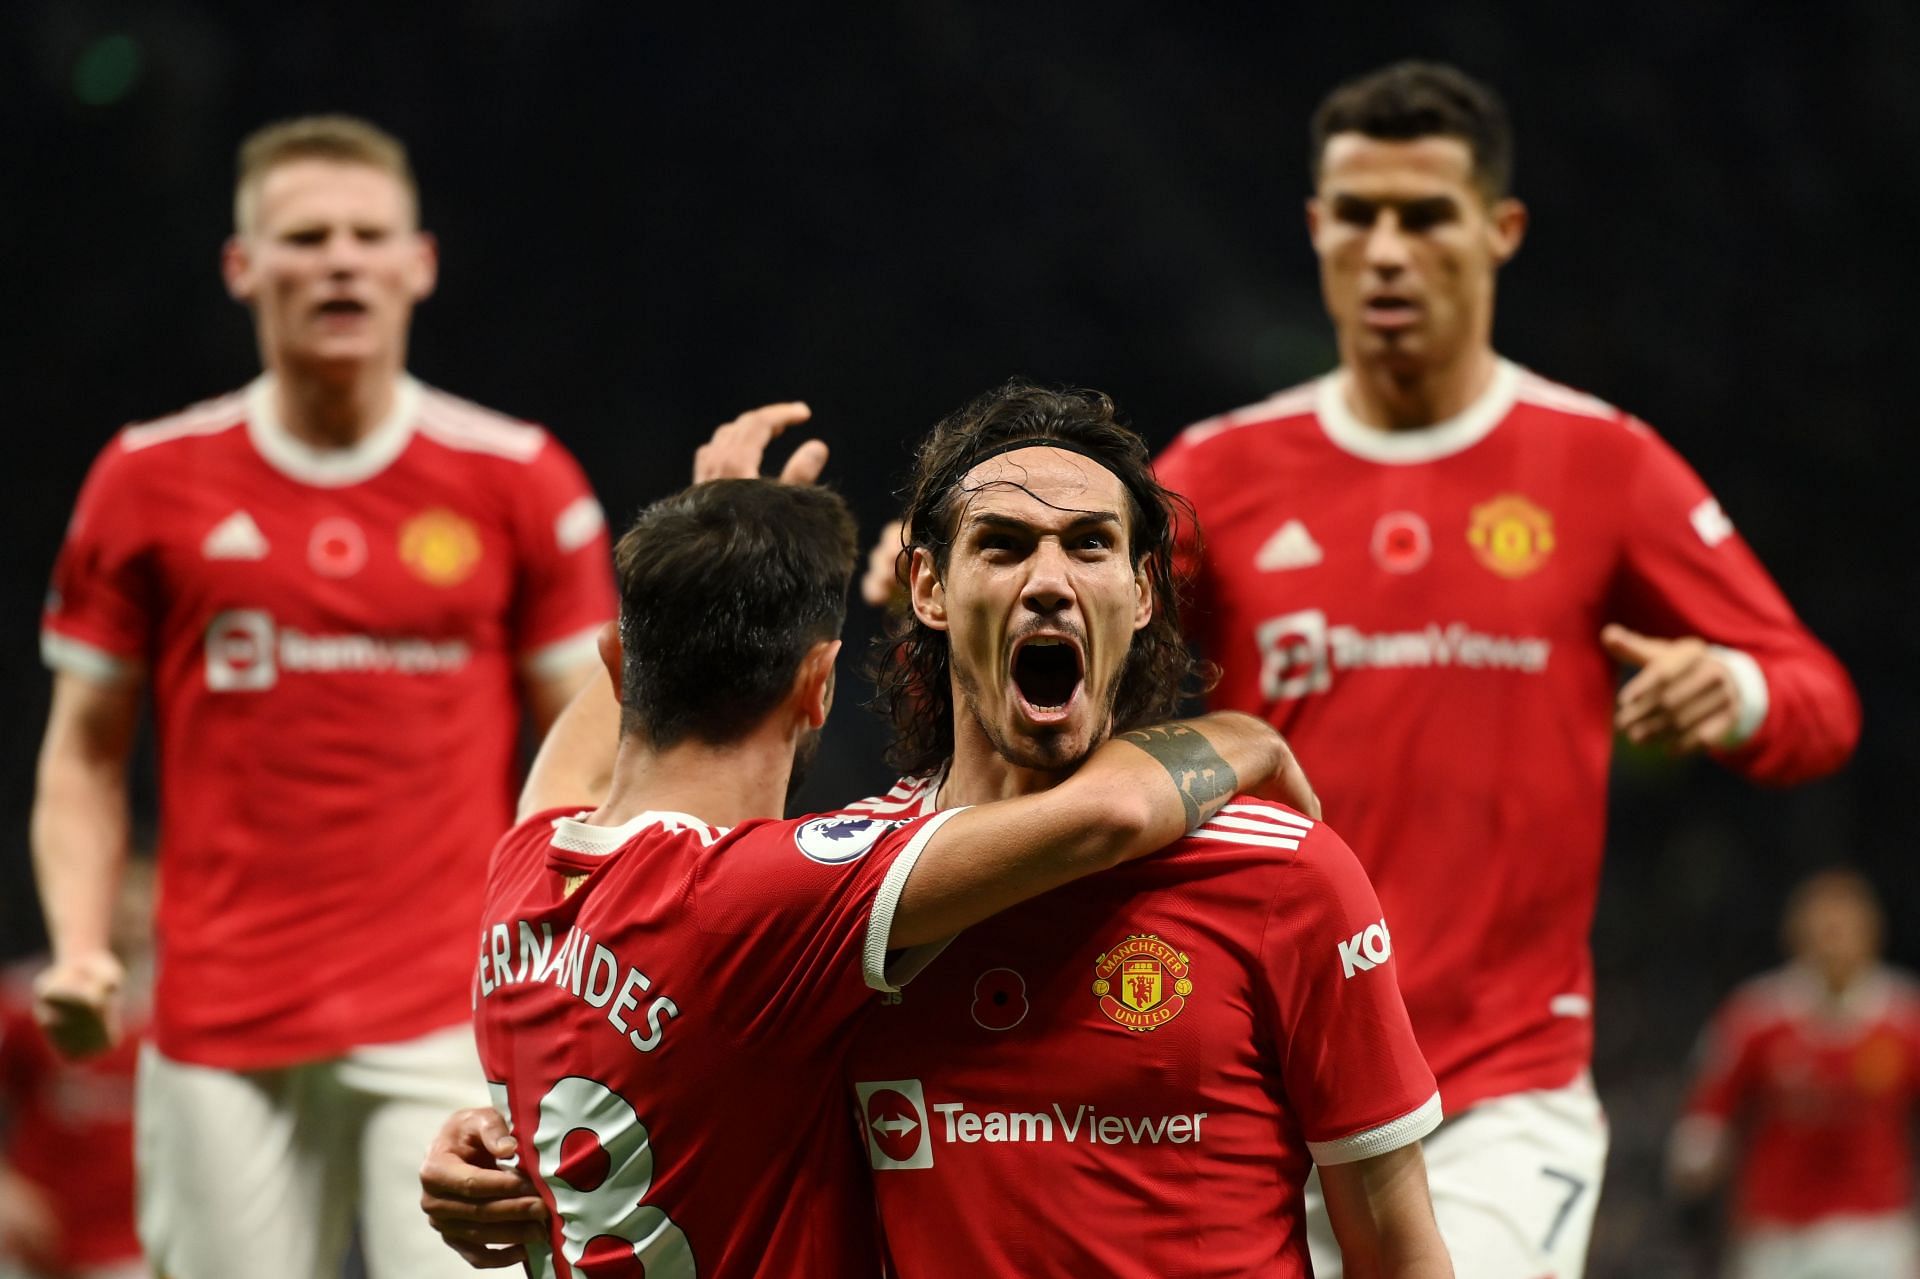 Sevilla have entered the race to sign Edinson Cavani from Manchester United.